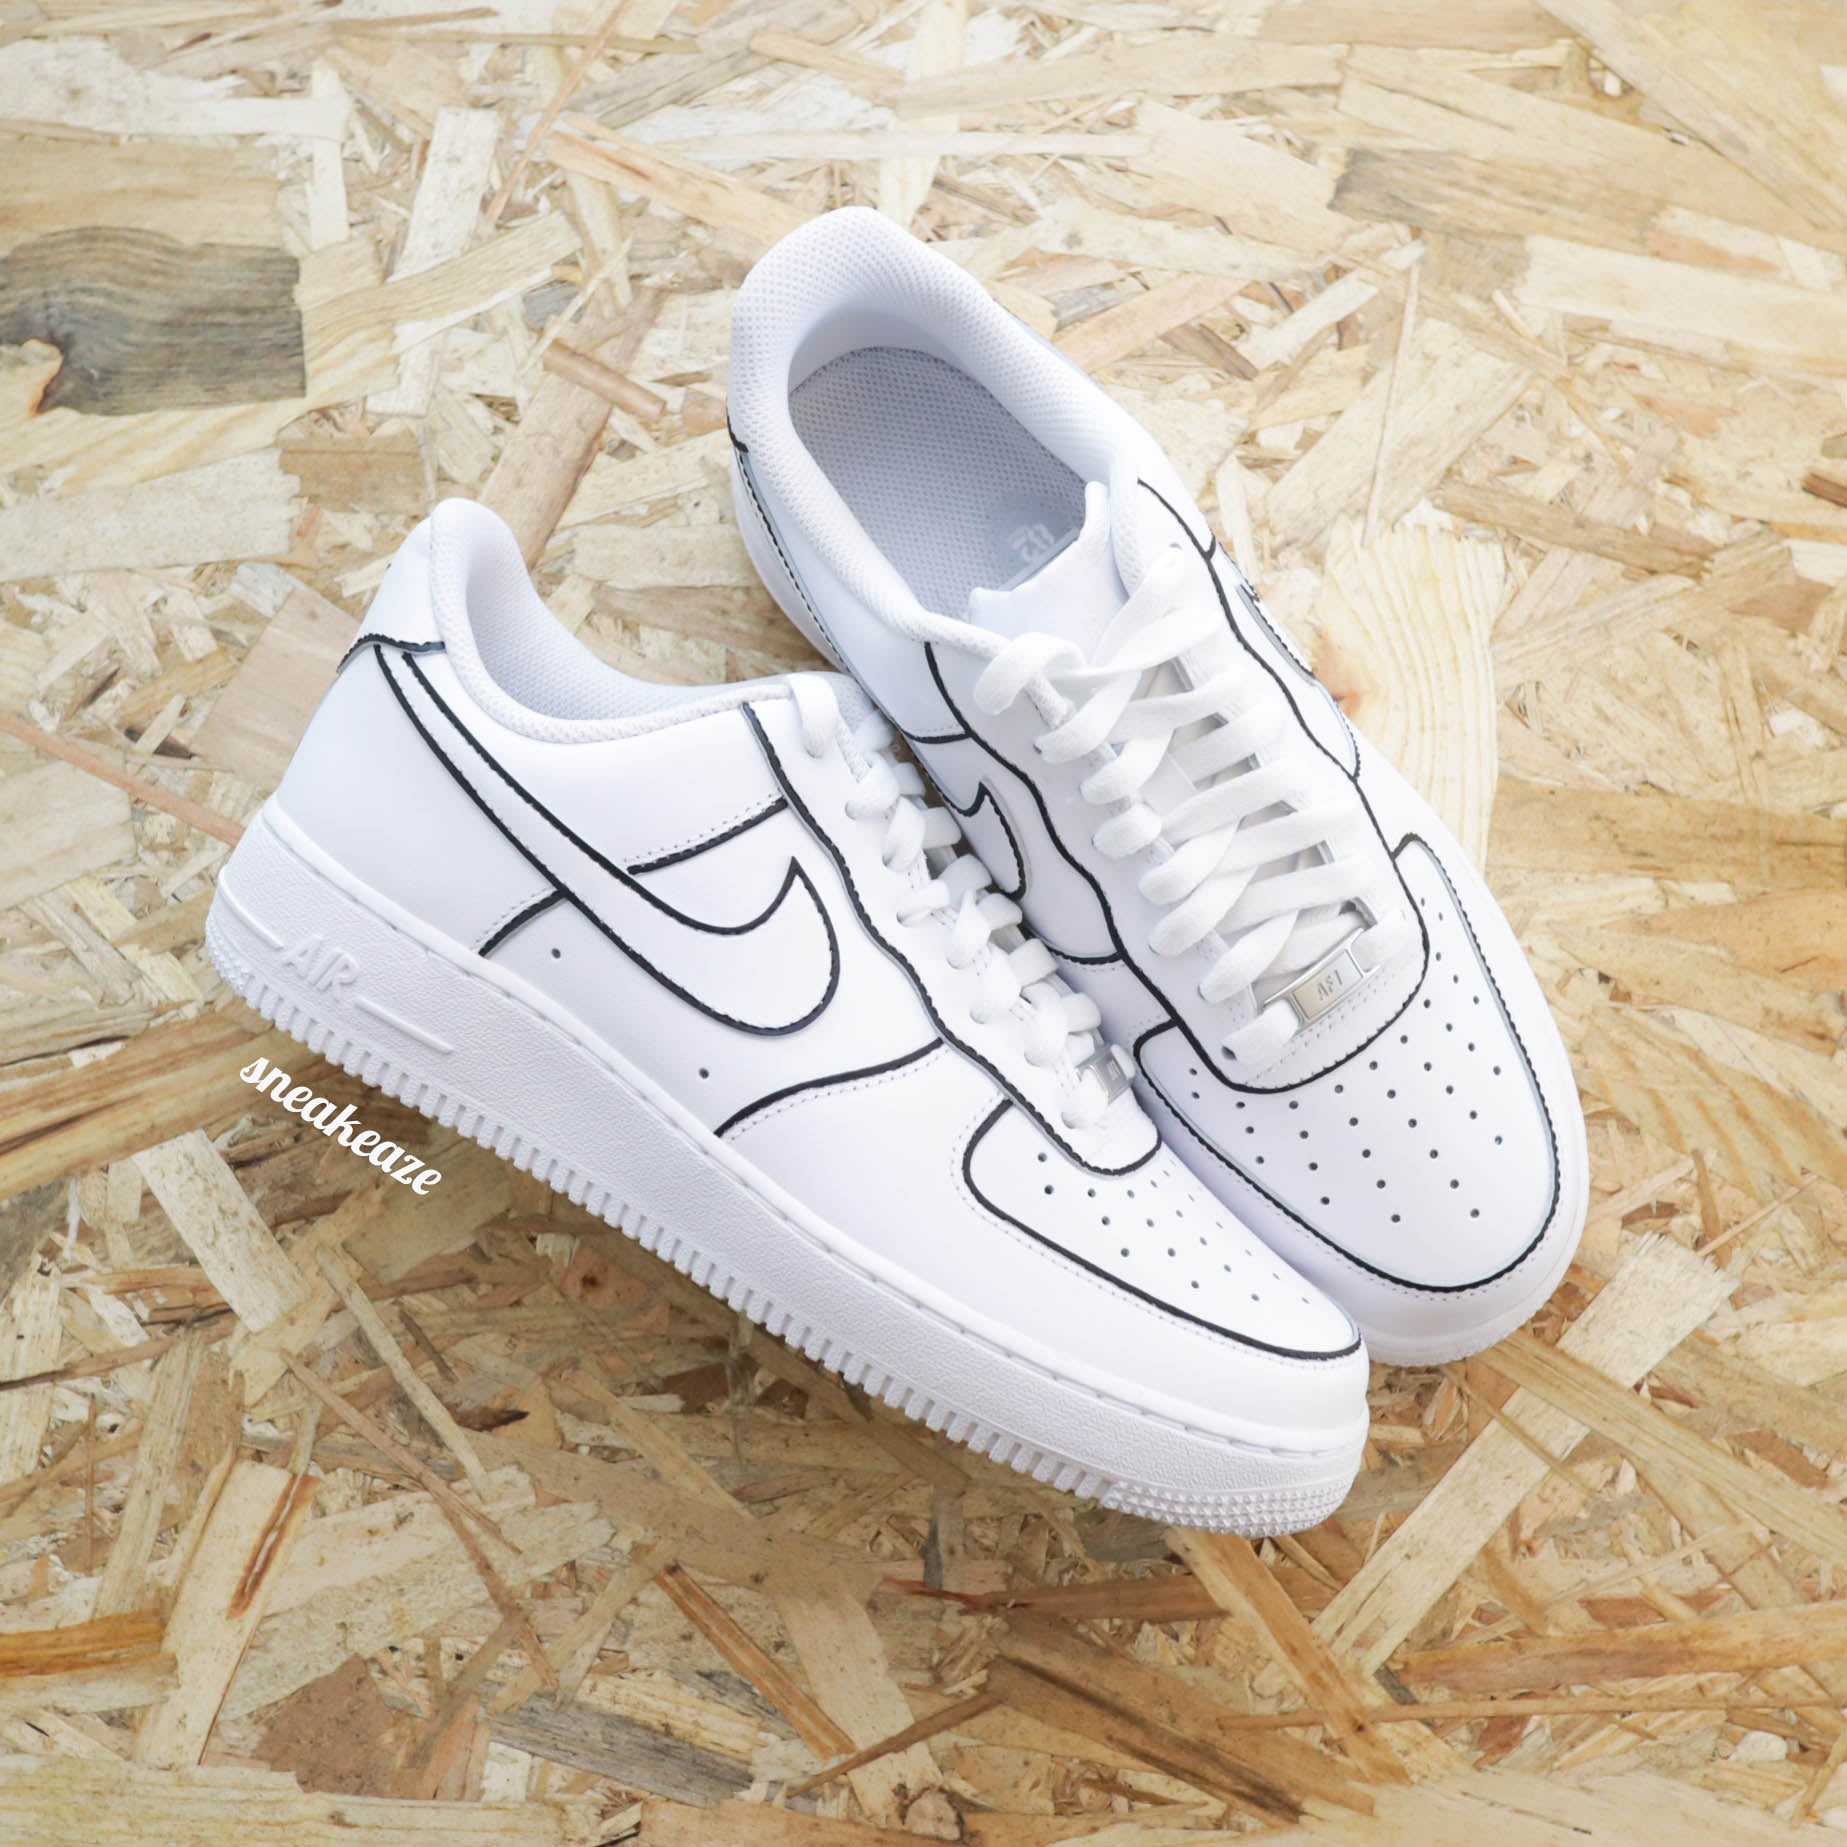 nike air force 1 custom lines outline sneakers af1 fashion sneakeaze